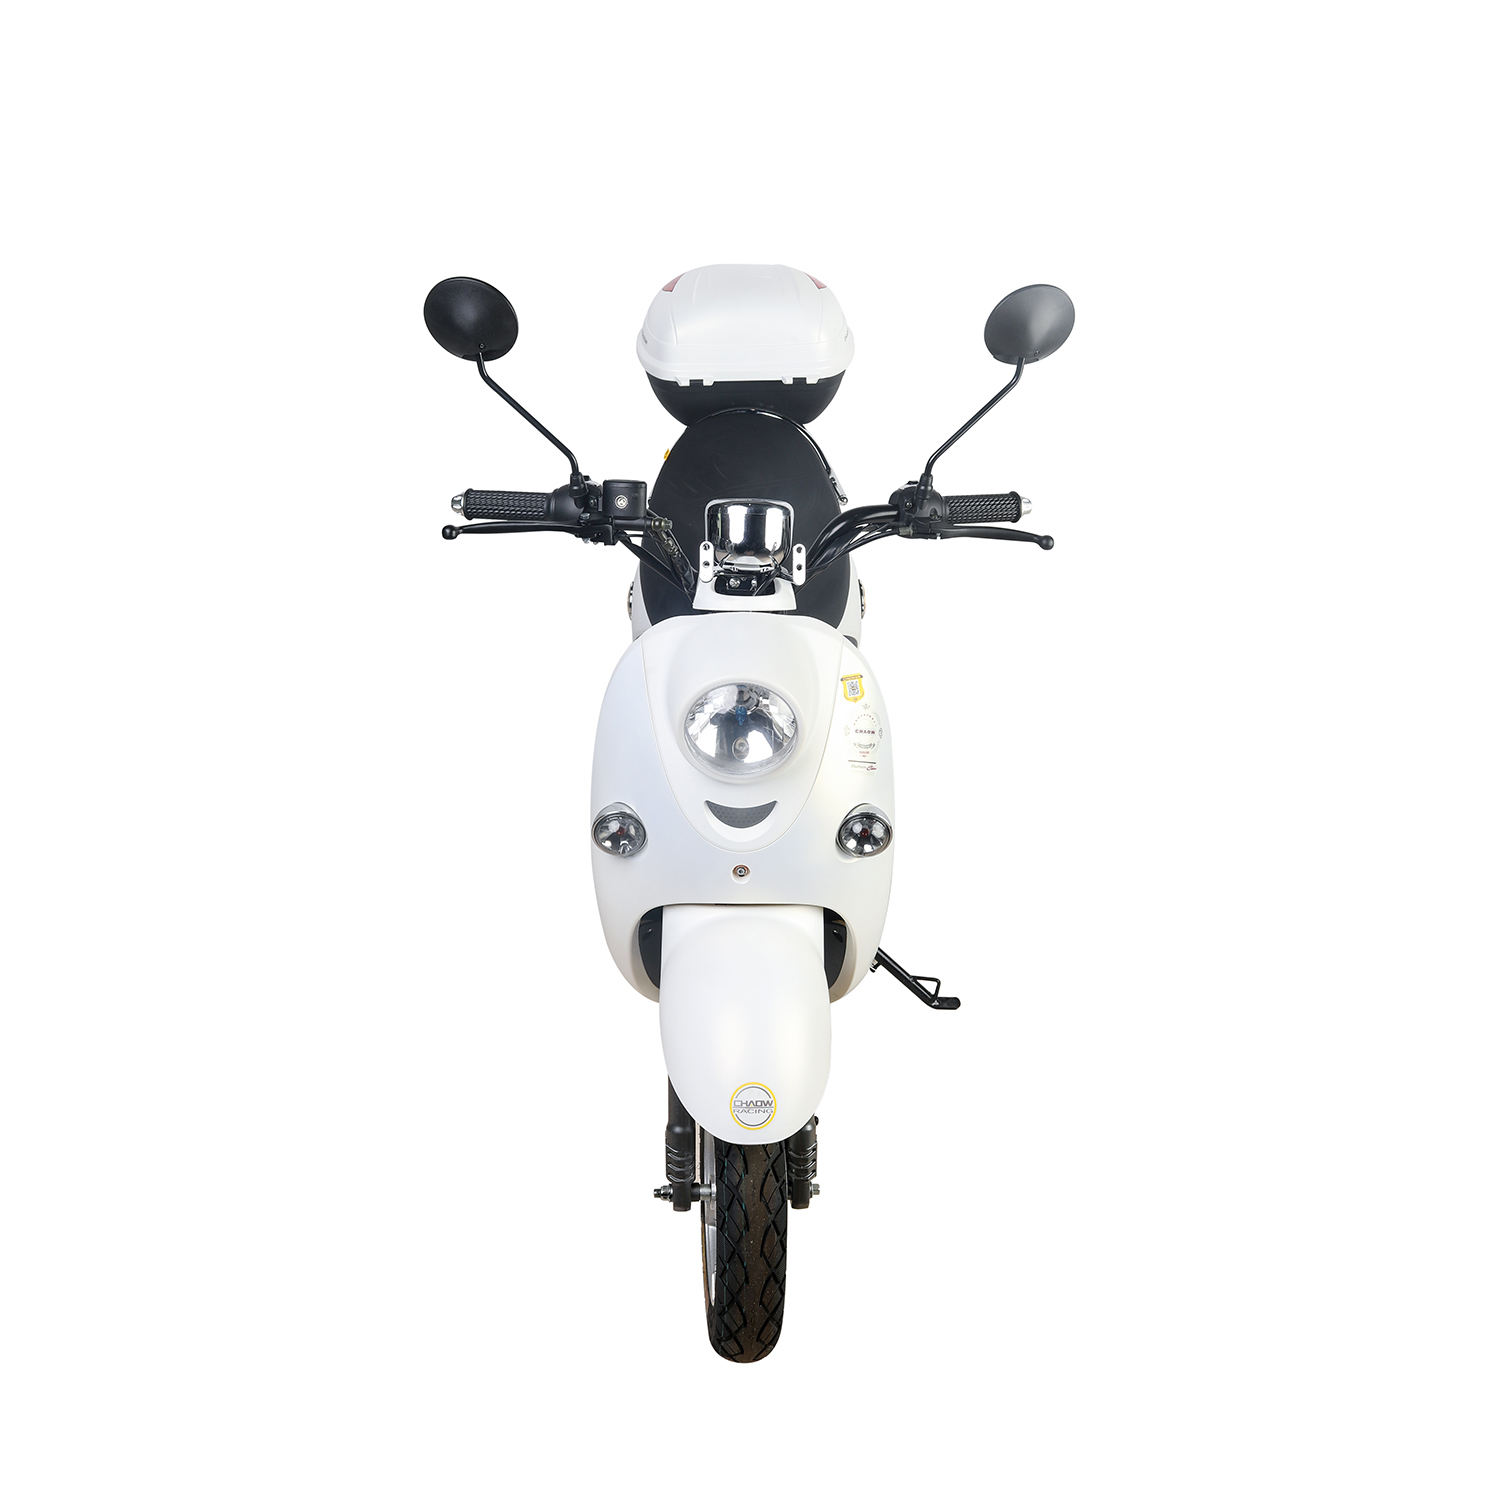 48-60V FASHION DESIGN TWO WHEEL ELECTRIC MOTORCYCLE SCOOTER (LW-1) 